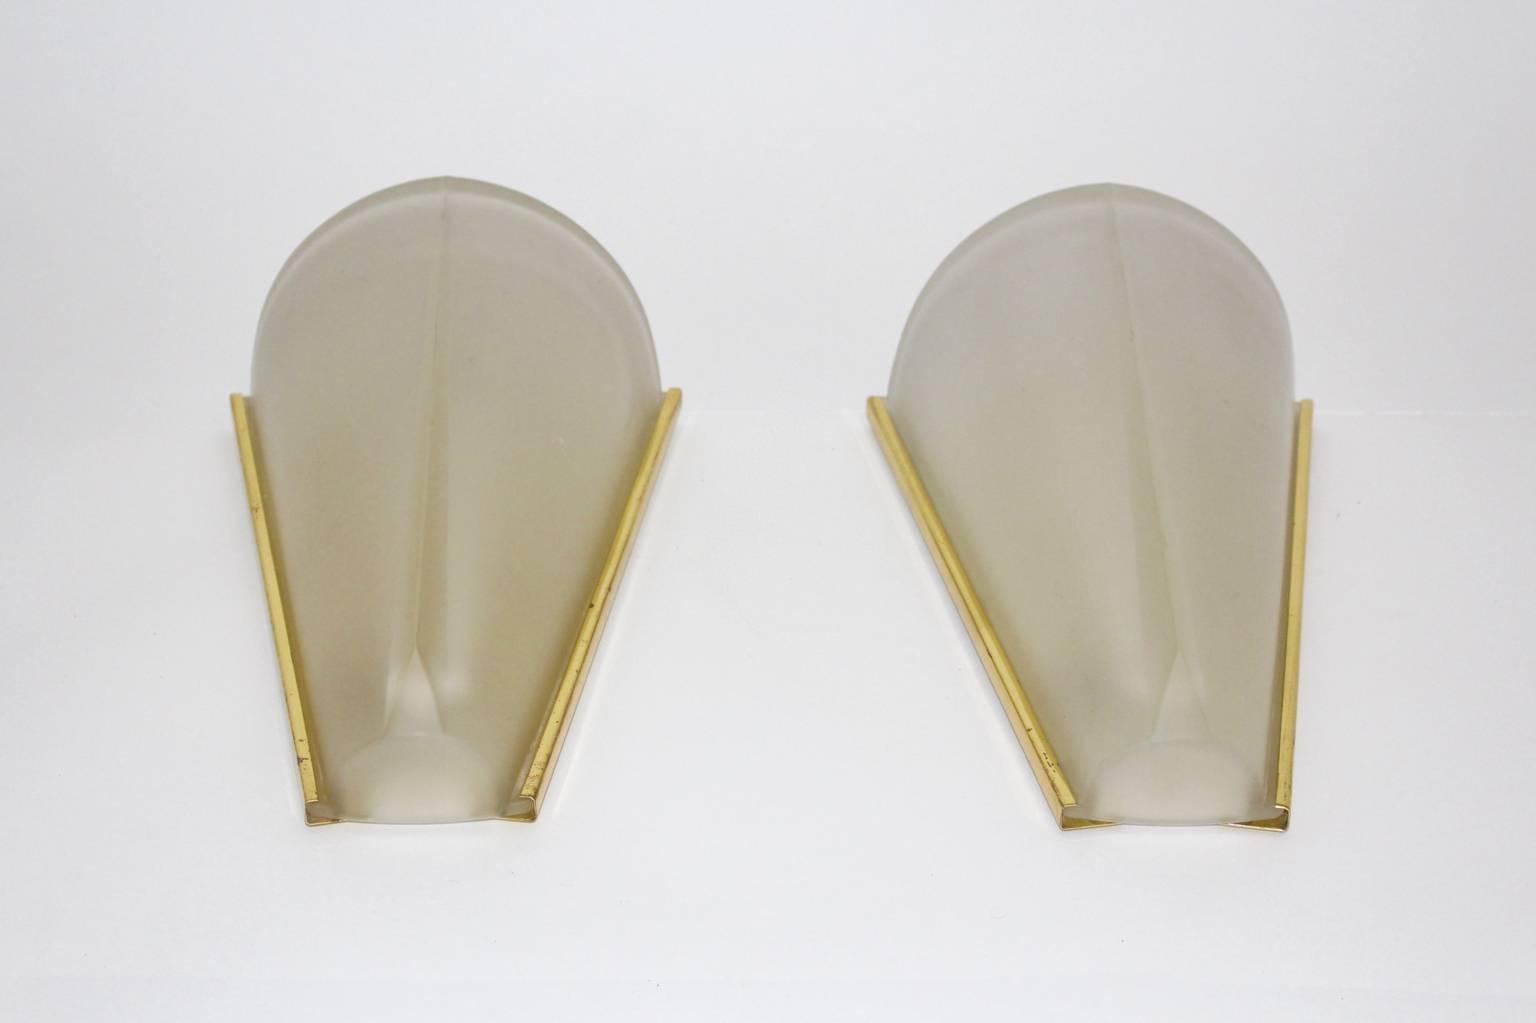 Elegant conical wall lights designed and manufactured in Germany in the 1960s by Hustadt Leuchten Germany.
The brass frames have a lovely vintage patina, while the etched glass shades are in very good condition without any cracks or spots.
Each wall